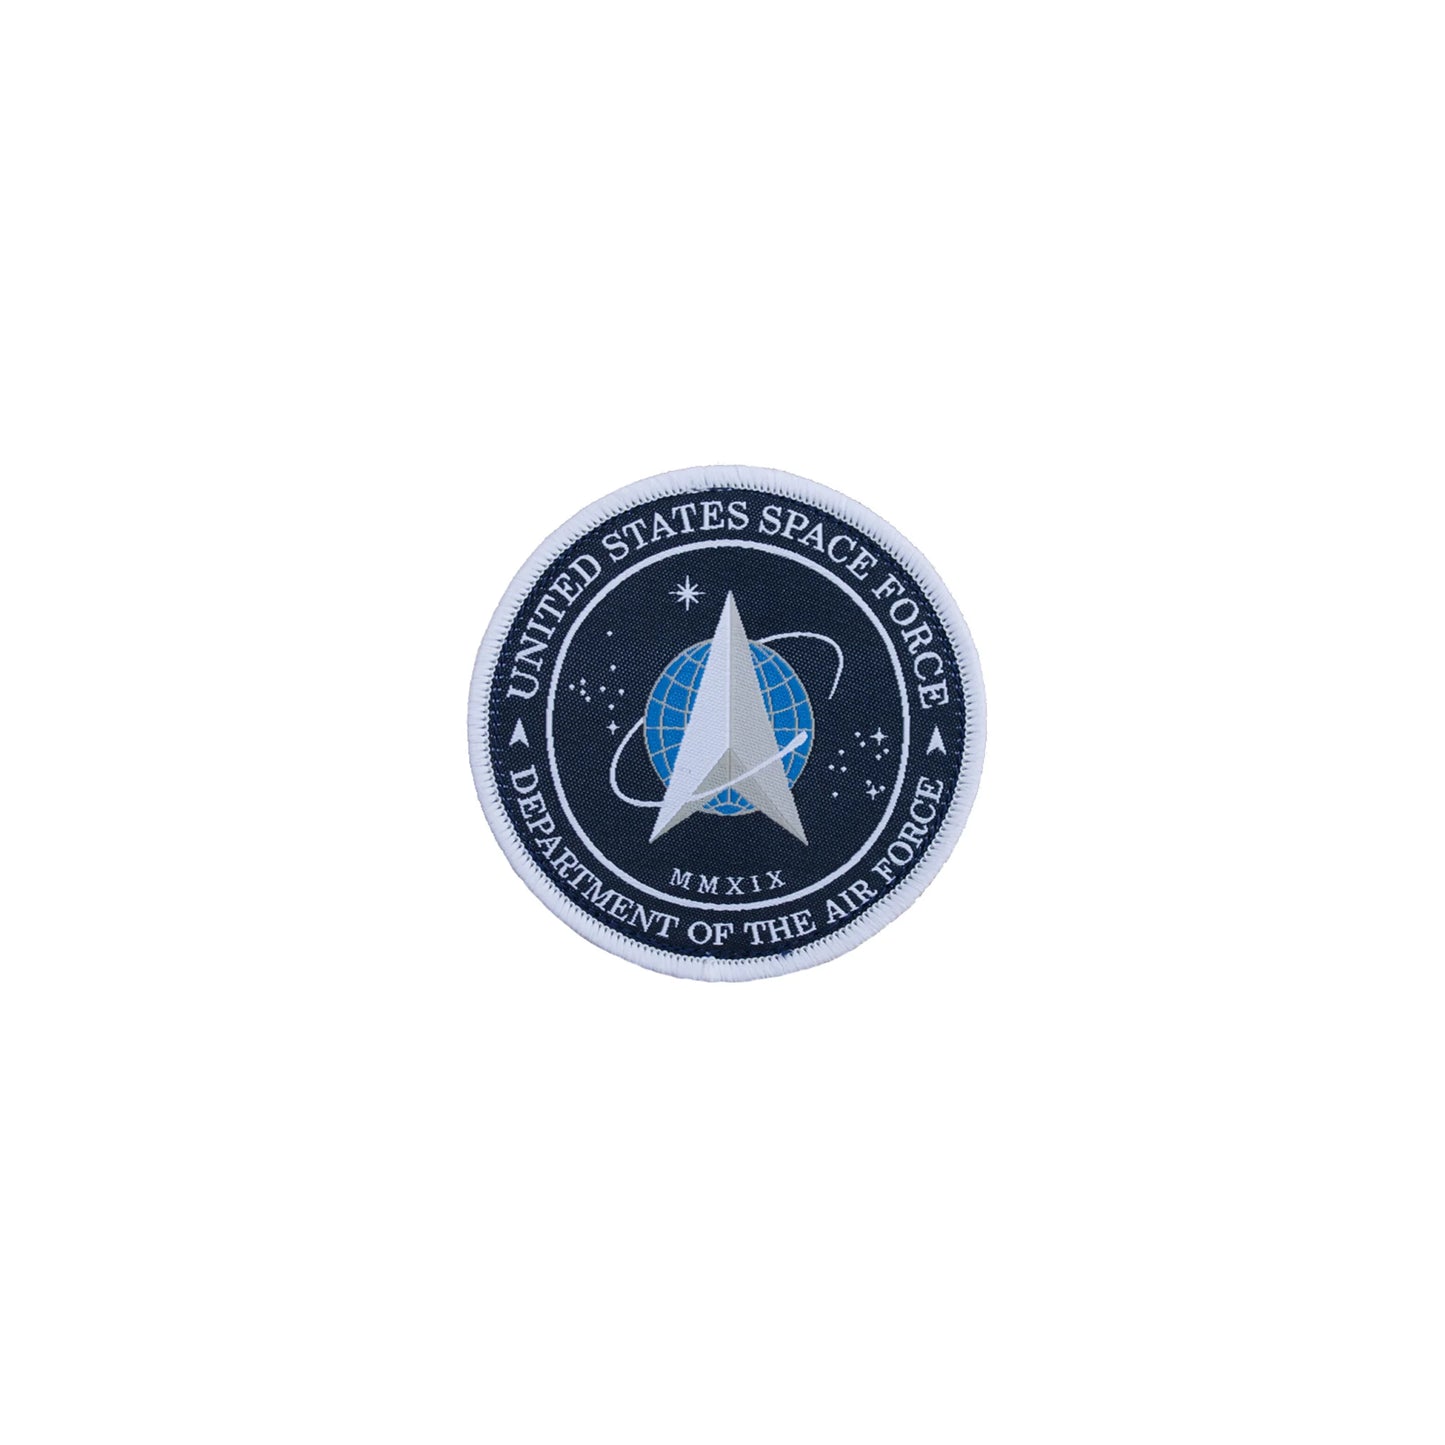 UNITED STATES SPACE FORCE LOGO PATCH